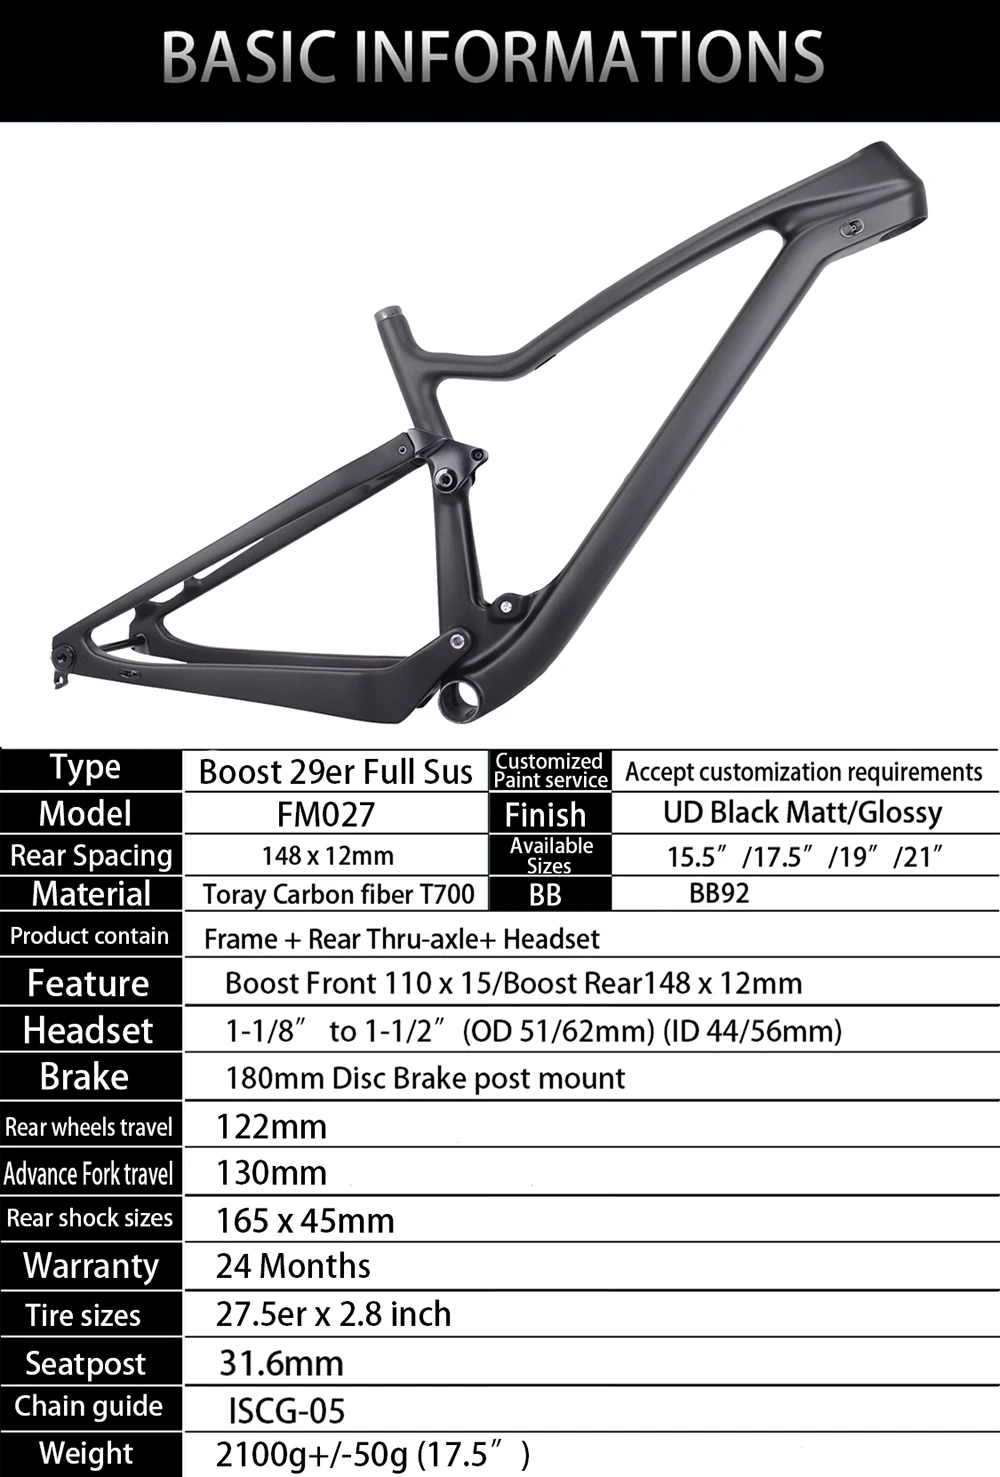 Sale Free shipping Full suspension frame 27.5er plus and 29er Boost carbon bike XC frame XS size with inner cables XS/S/M/L/XL 1